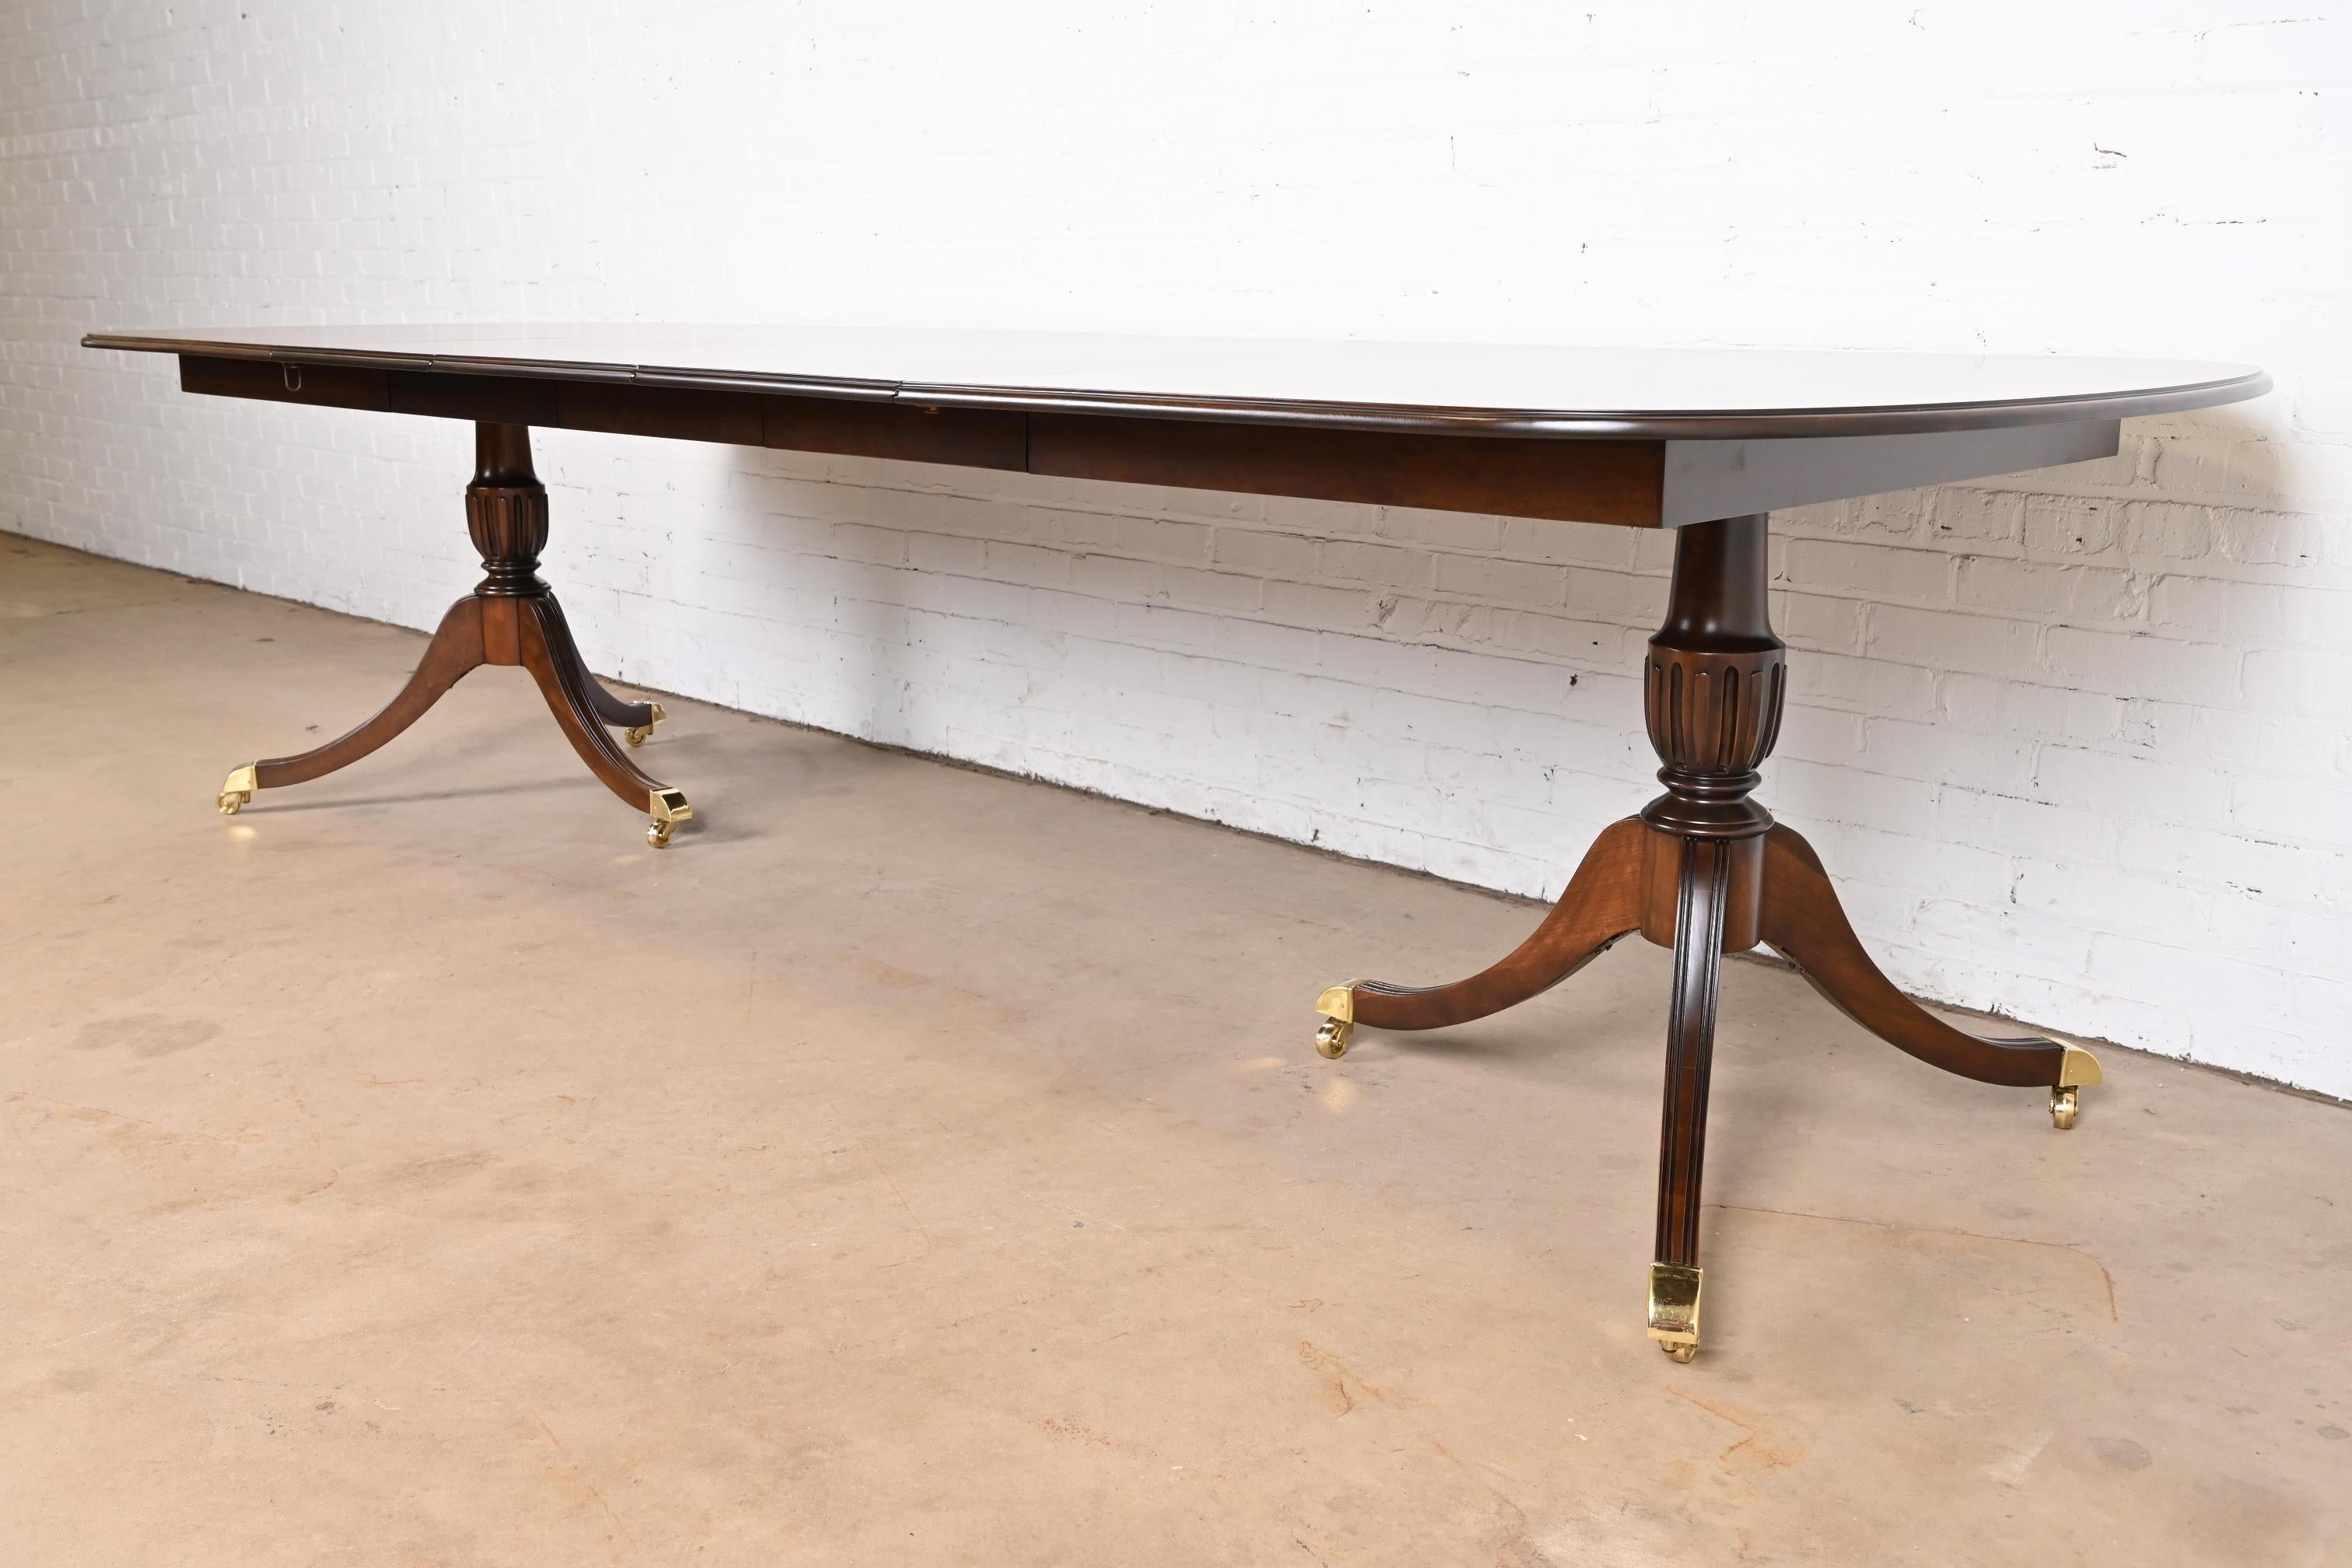 20th Century Harden Furniture Georgian Cherry Wood Double Pedestal Dining Table, Refinished For Sale